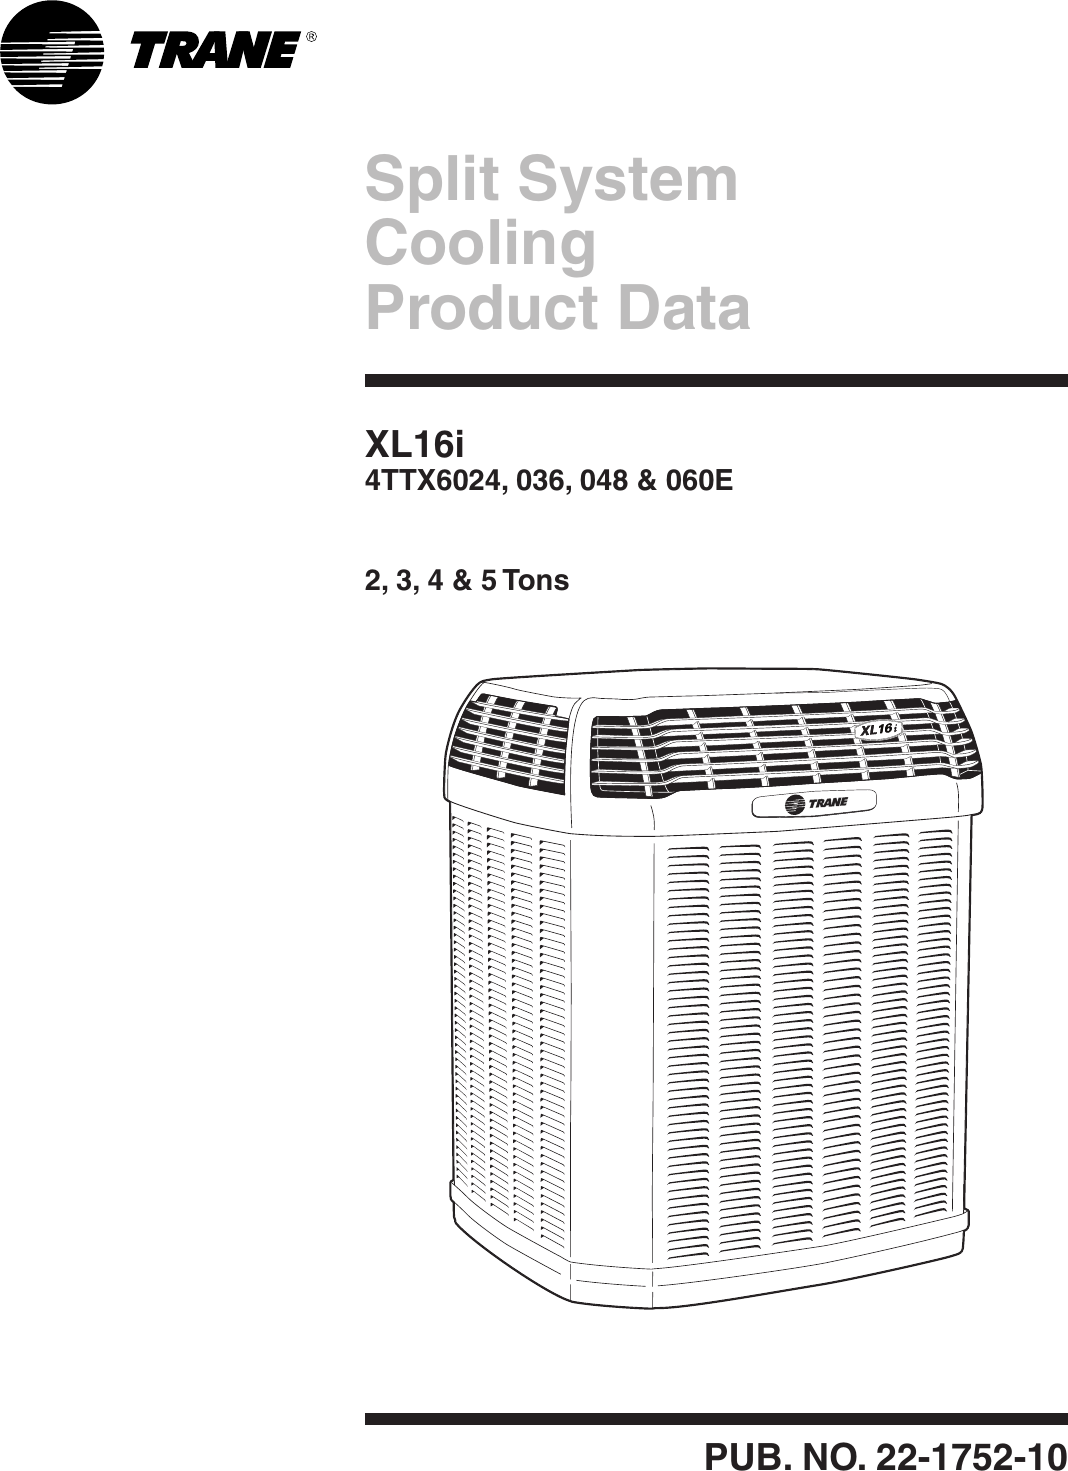 Page 1 of 12 - Trane Trane-4Ttx6024-036-048-And-060E-Users-Manual- 22-1752-10 10/01/2010 Split System Cooling Product Data XL16i 4TTX6024, 036, 048, 060E 2,3,4 And 5 Tons  Trane-4ttx6024-036-048-and-060e-users-manual